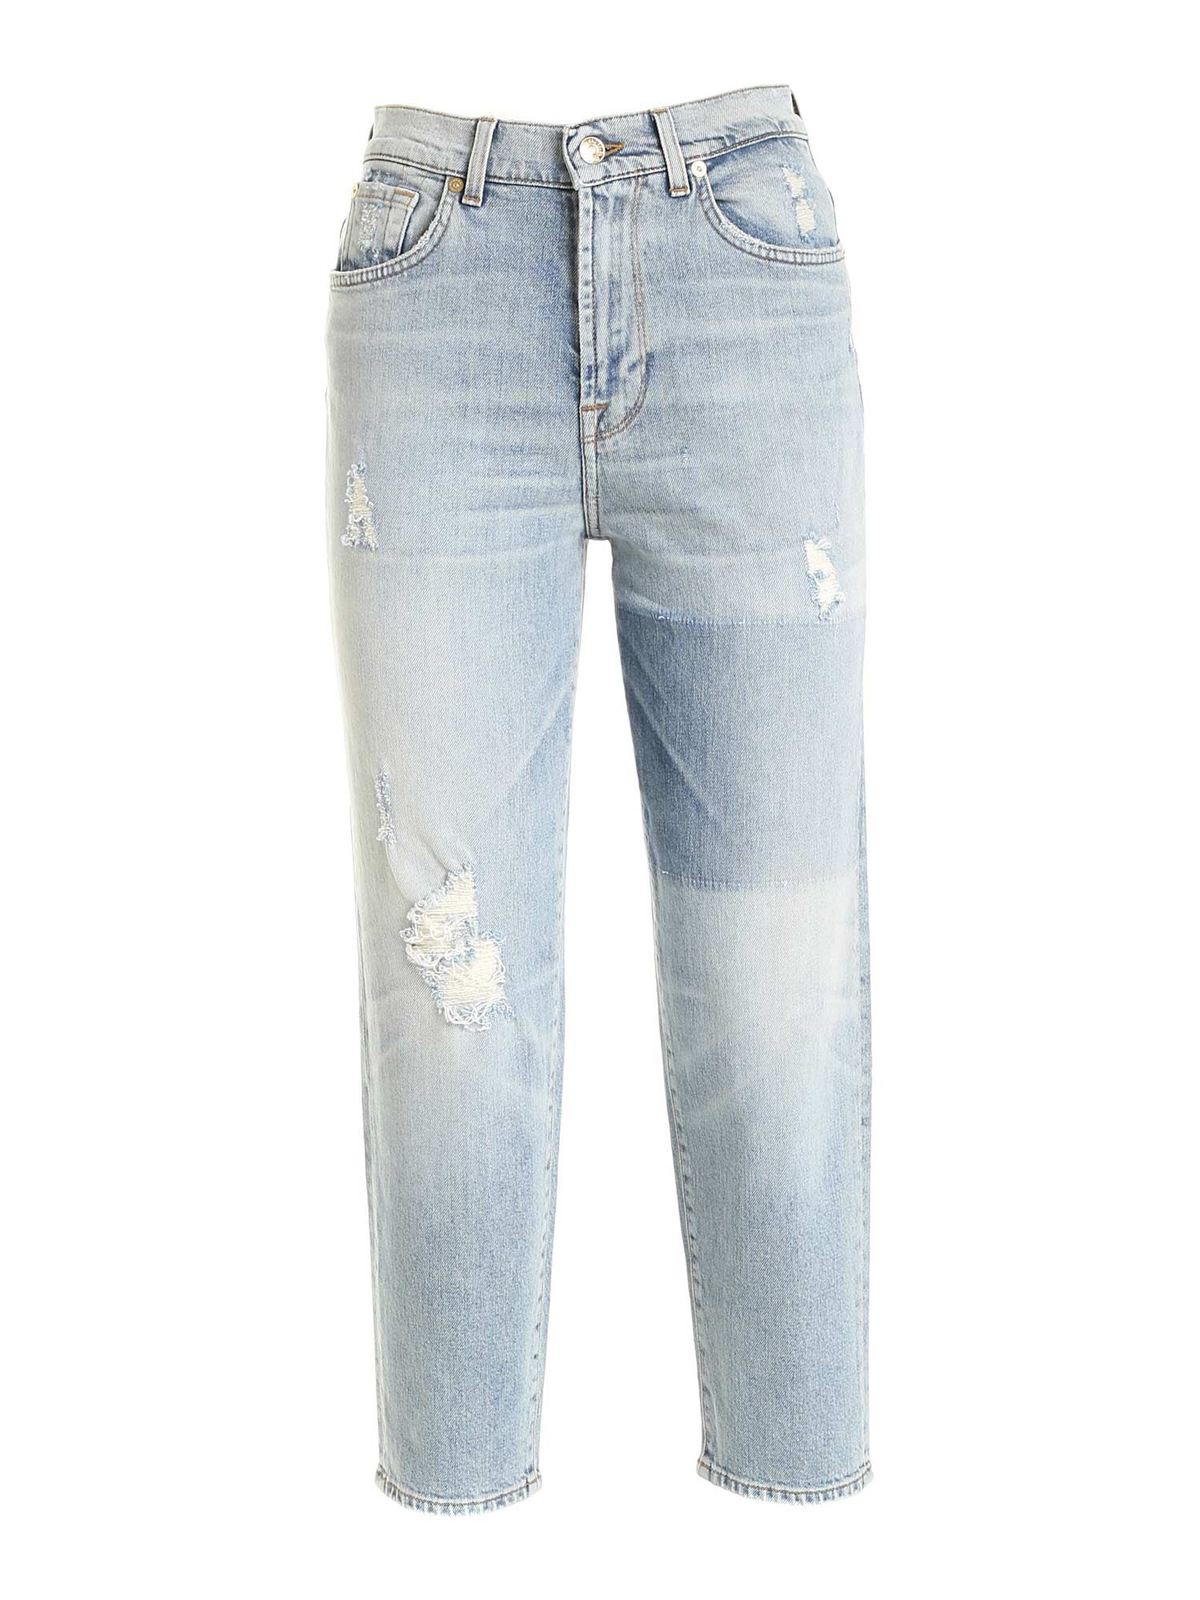 7 For All Mankind MALIA VINTAGE-EFFECT JEANS IN LIGHT BLUE